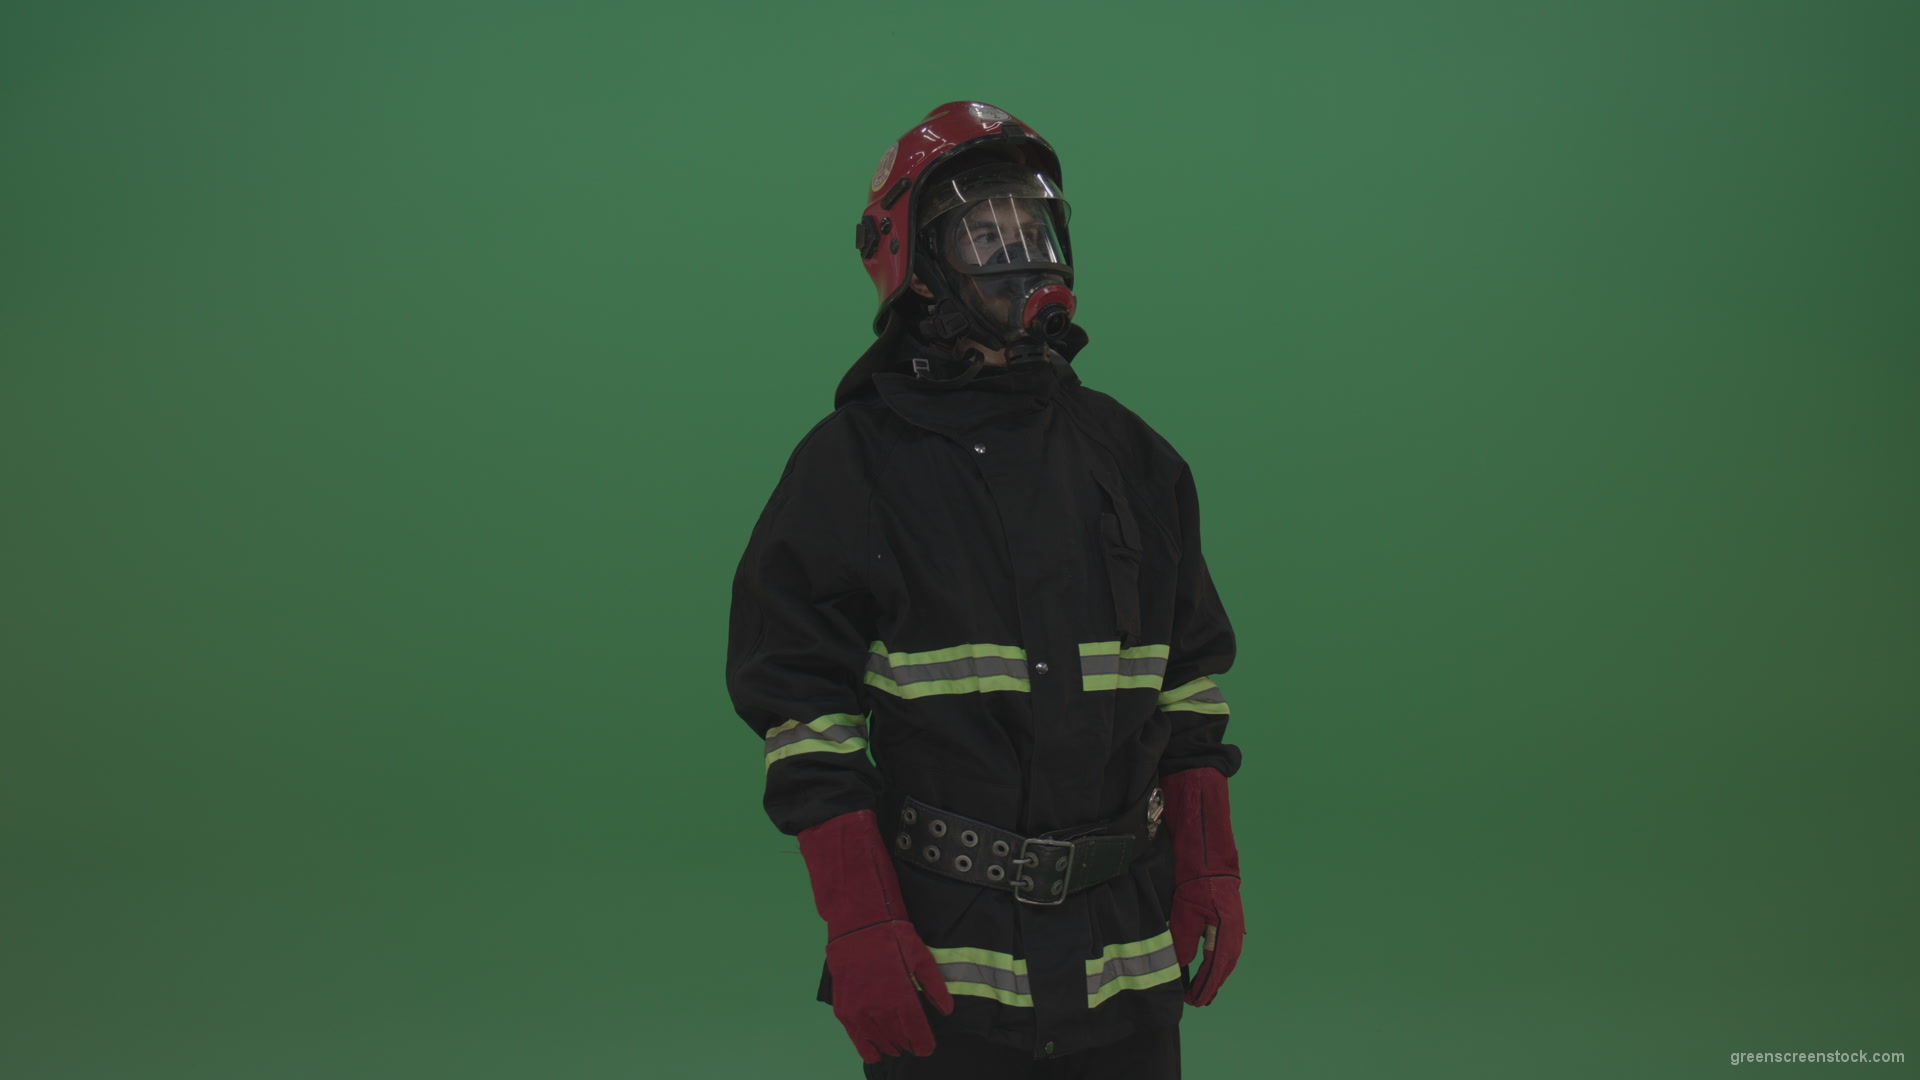 Young_Fireman_Points_Left_And_Right_At_Something_He_Noticed_On_Green_Screen_Chroma_Key_Wall_Background_002 Green Screen Stock